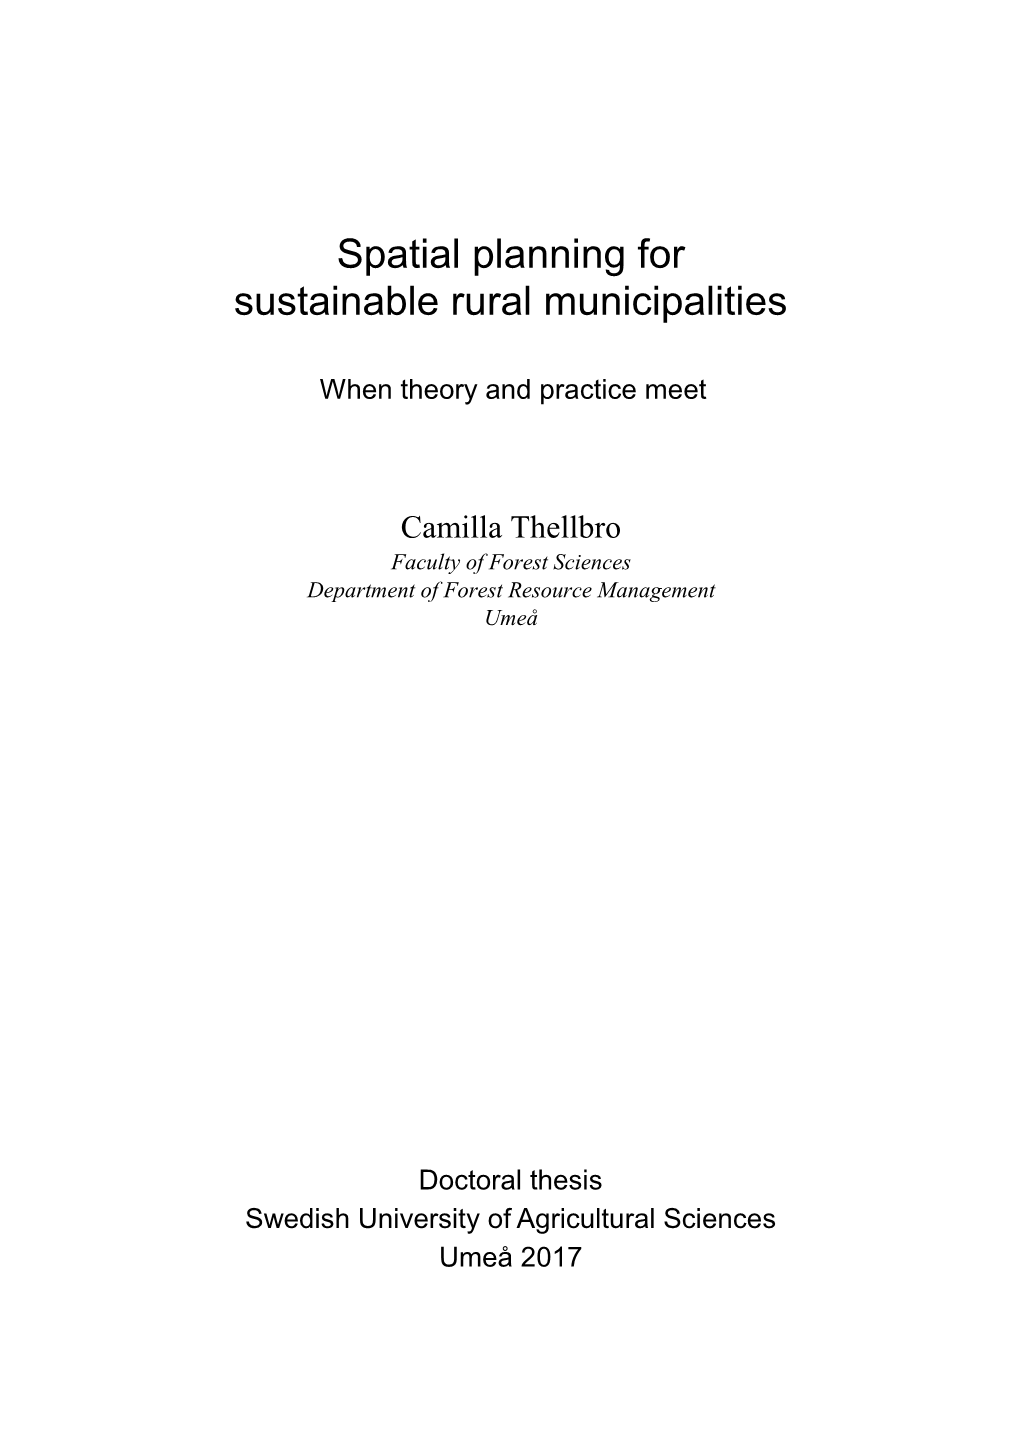 Spatial Planning for Sustainable Rural Municipalities